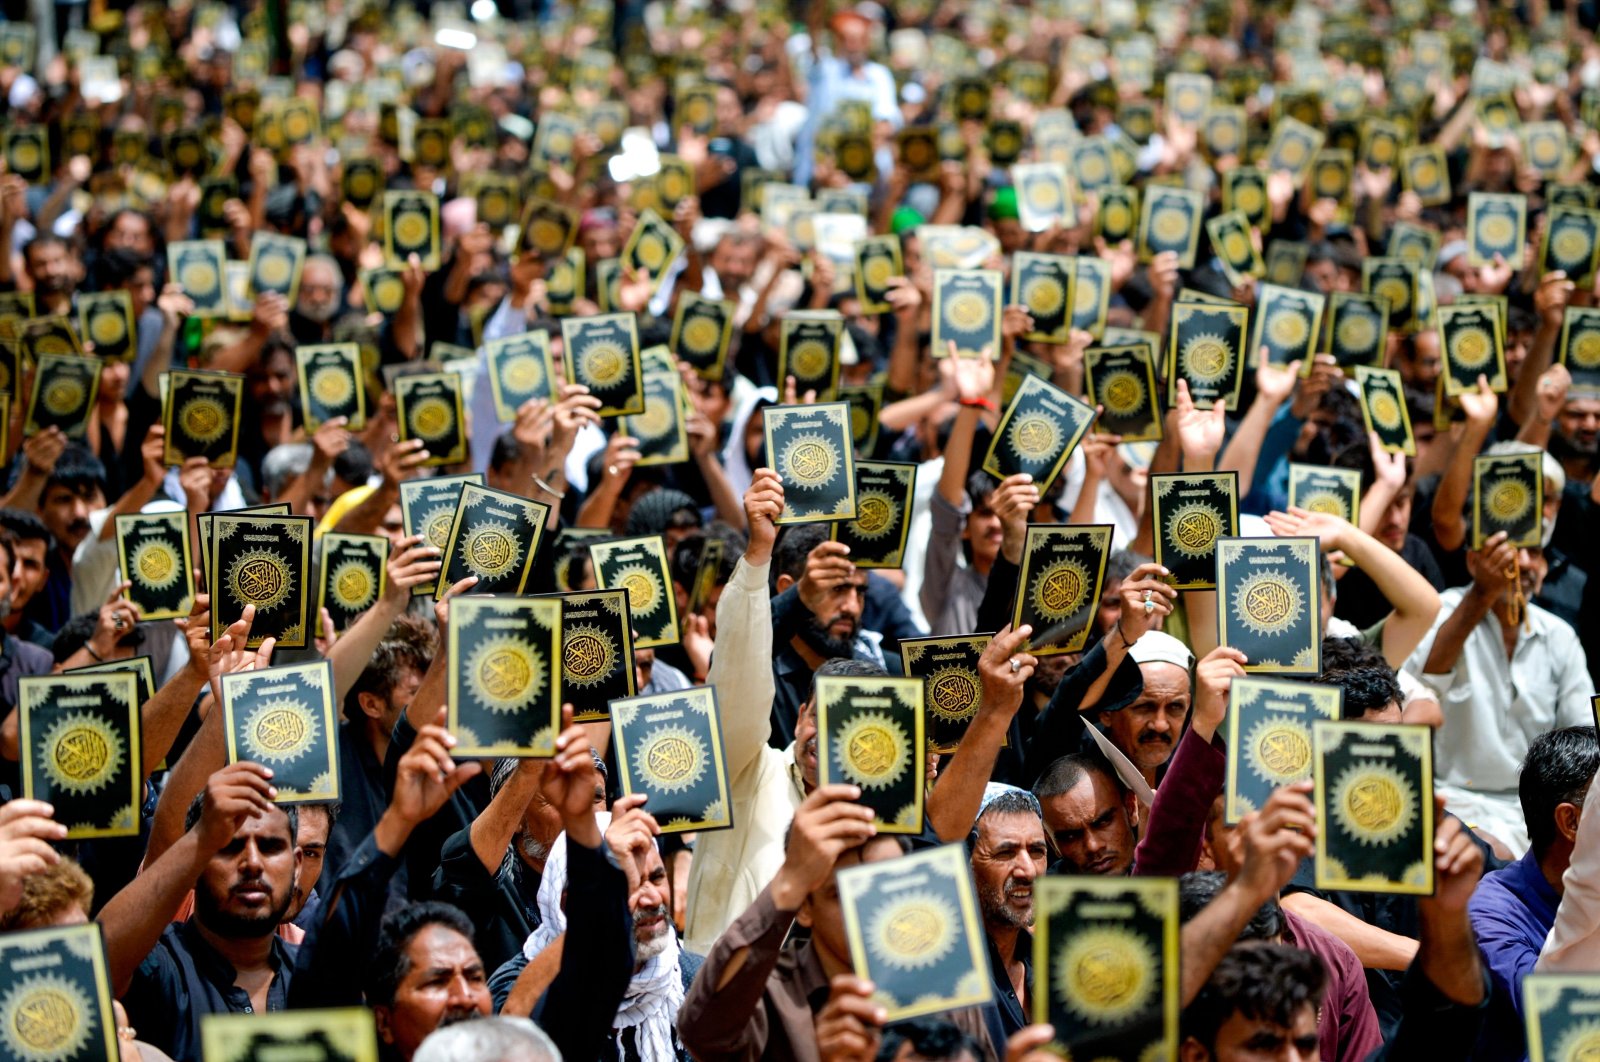 Shiite Muslims make anti-Sweden slogans as they protest against the burning of the Koran outside a Stockholm mosque that outraged Muslims around the world during a procession on the 10th day of Ashura in the Islamic month of Muharram, Karachi, Pakistan, July 29, 2023. (AFP Photo)